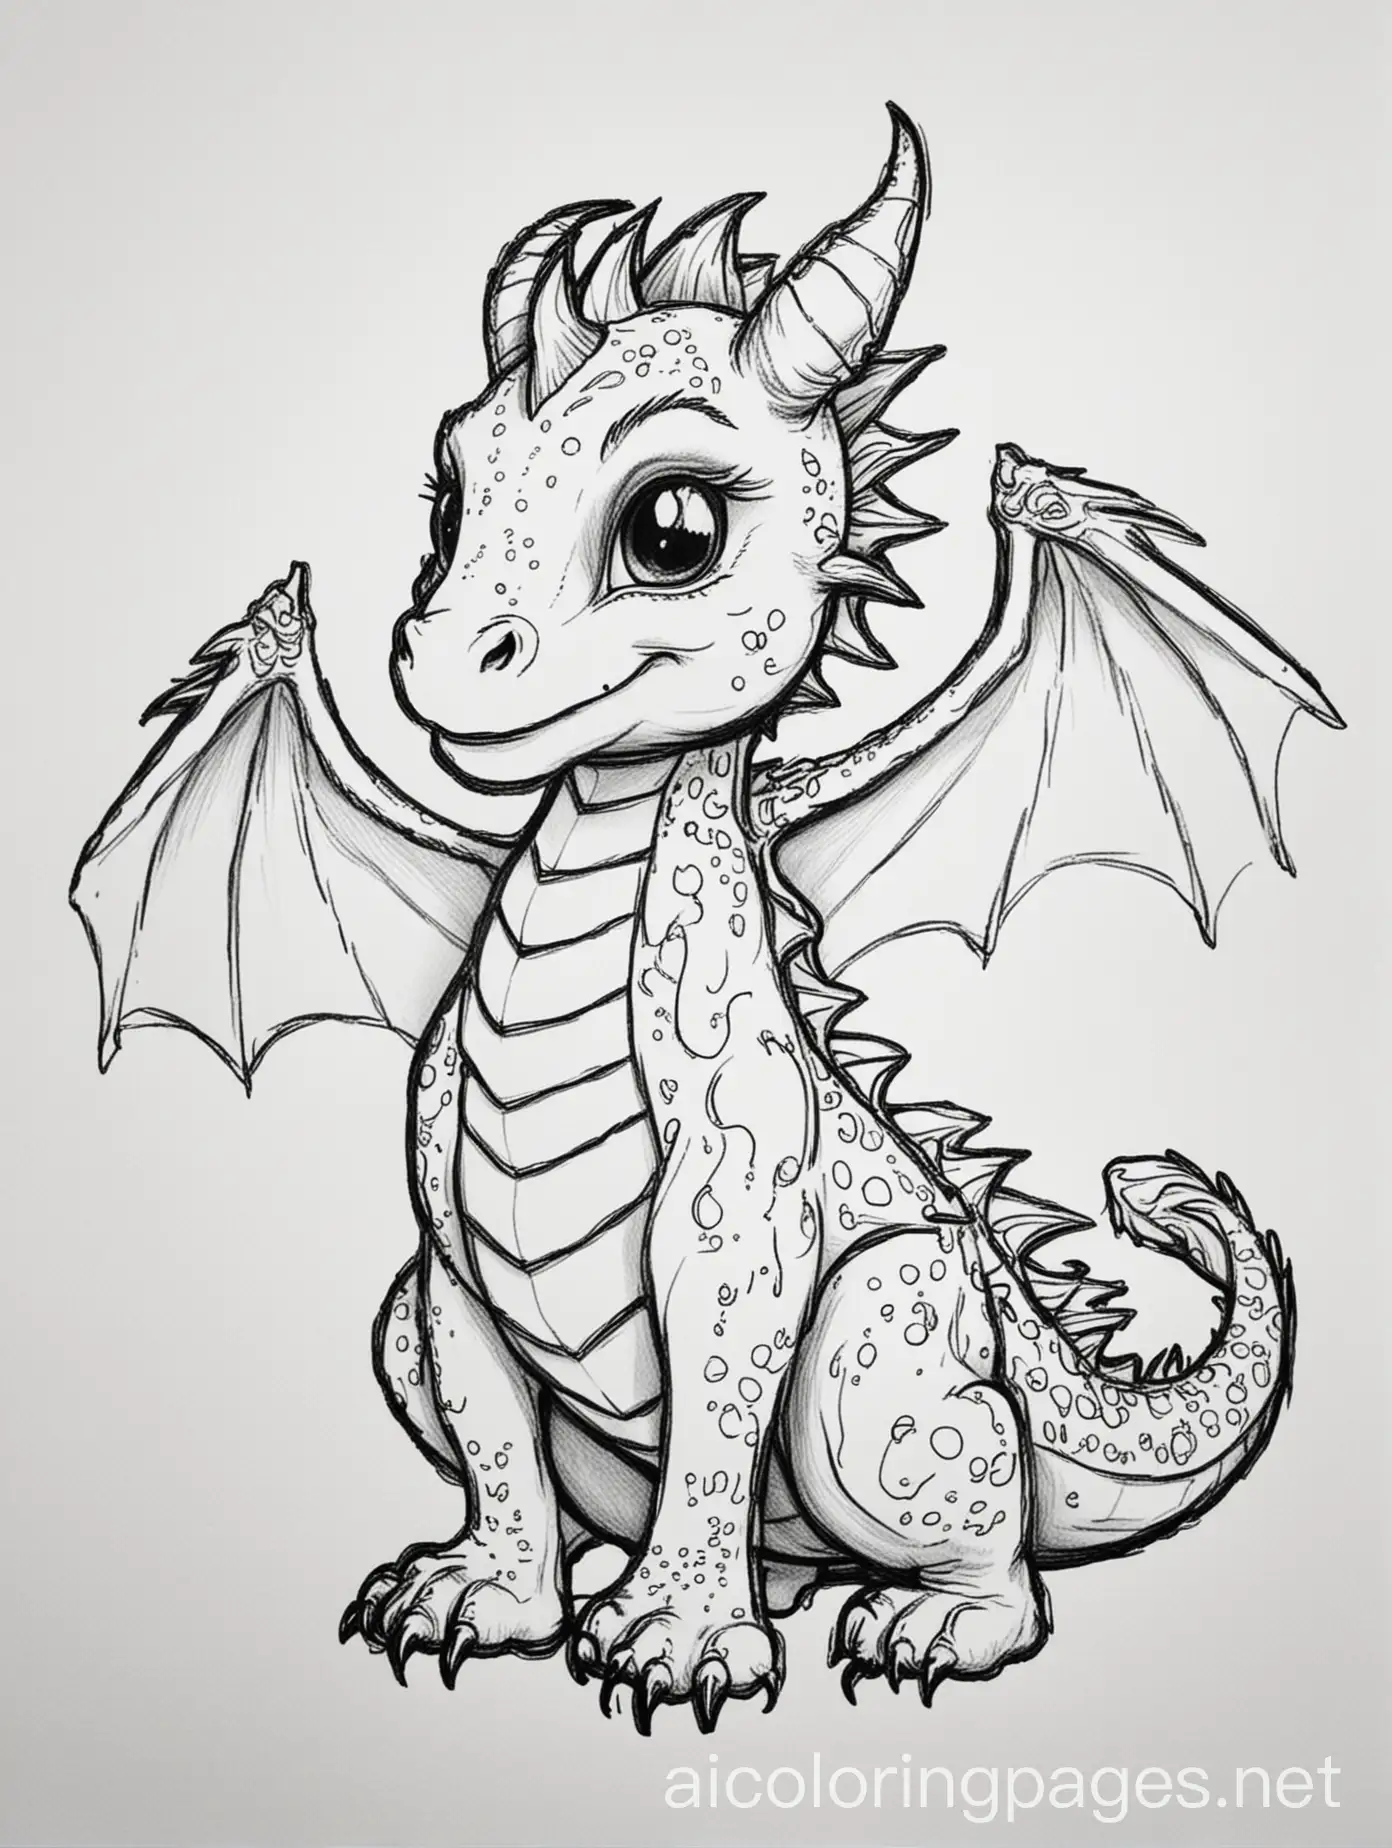 dragon, black and white, line art, coloring page, not realistic, easy to draw, cute, Coloring Page, black and white, line art, white background, Simplicity, Ample White Space. The background of the coloring page is plain white to make it easy for young children to color within the lines. The outlines of all the subjects are easy to distinguish, making it simple for kids to color without too much difficulty